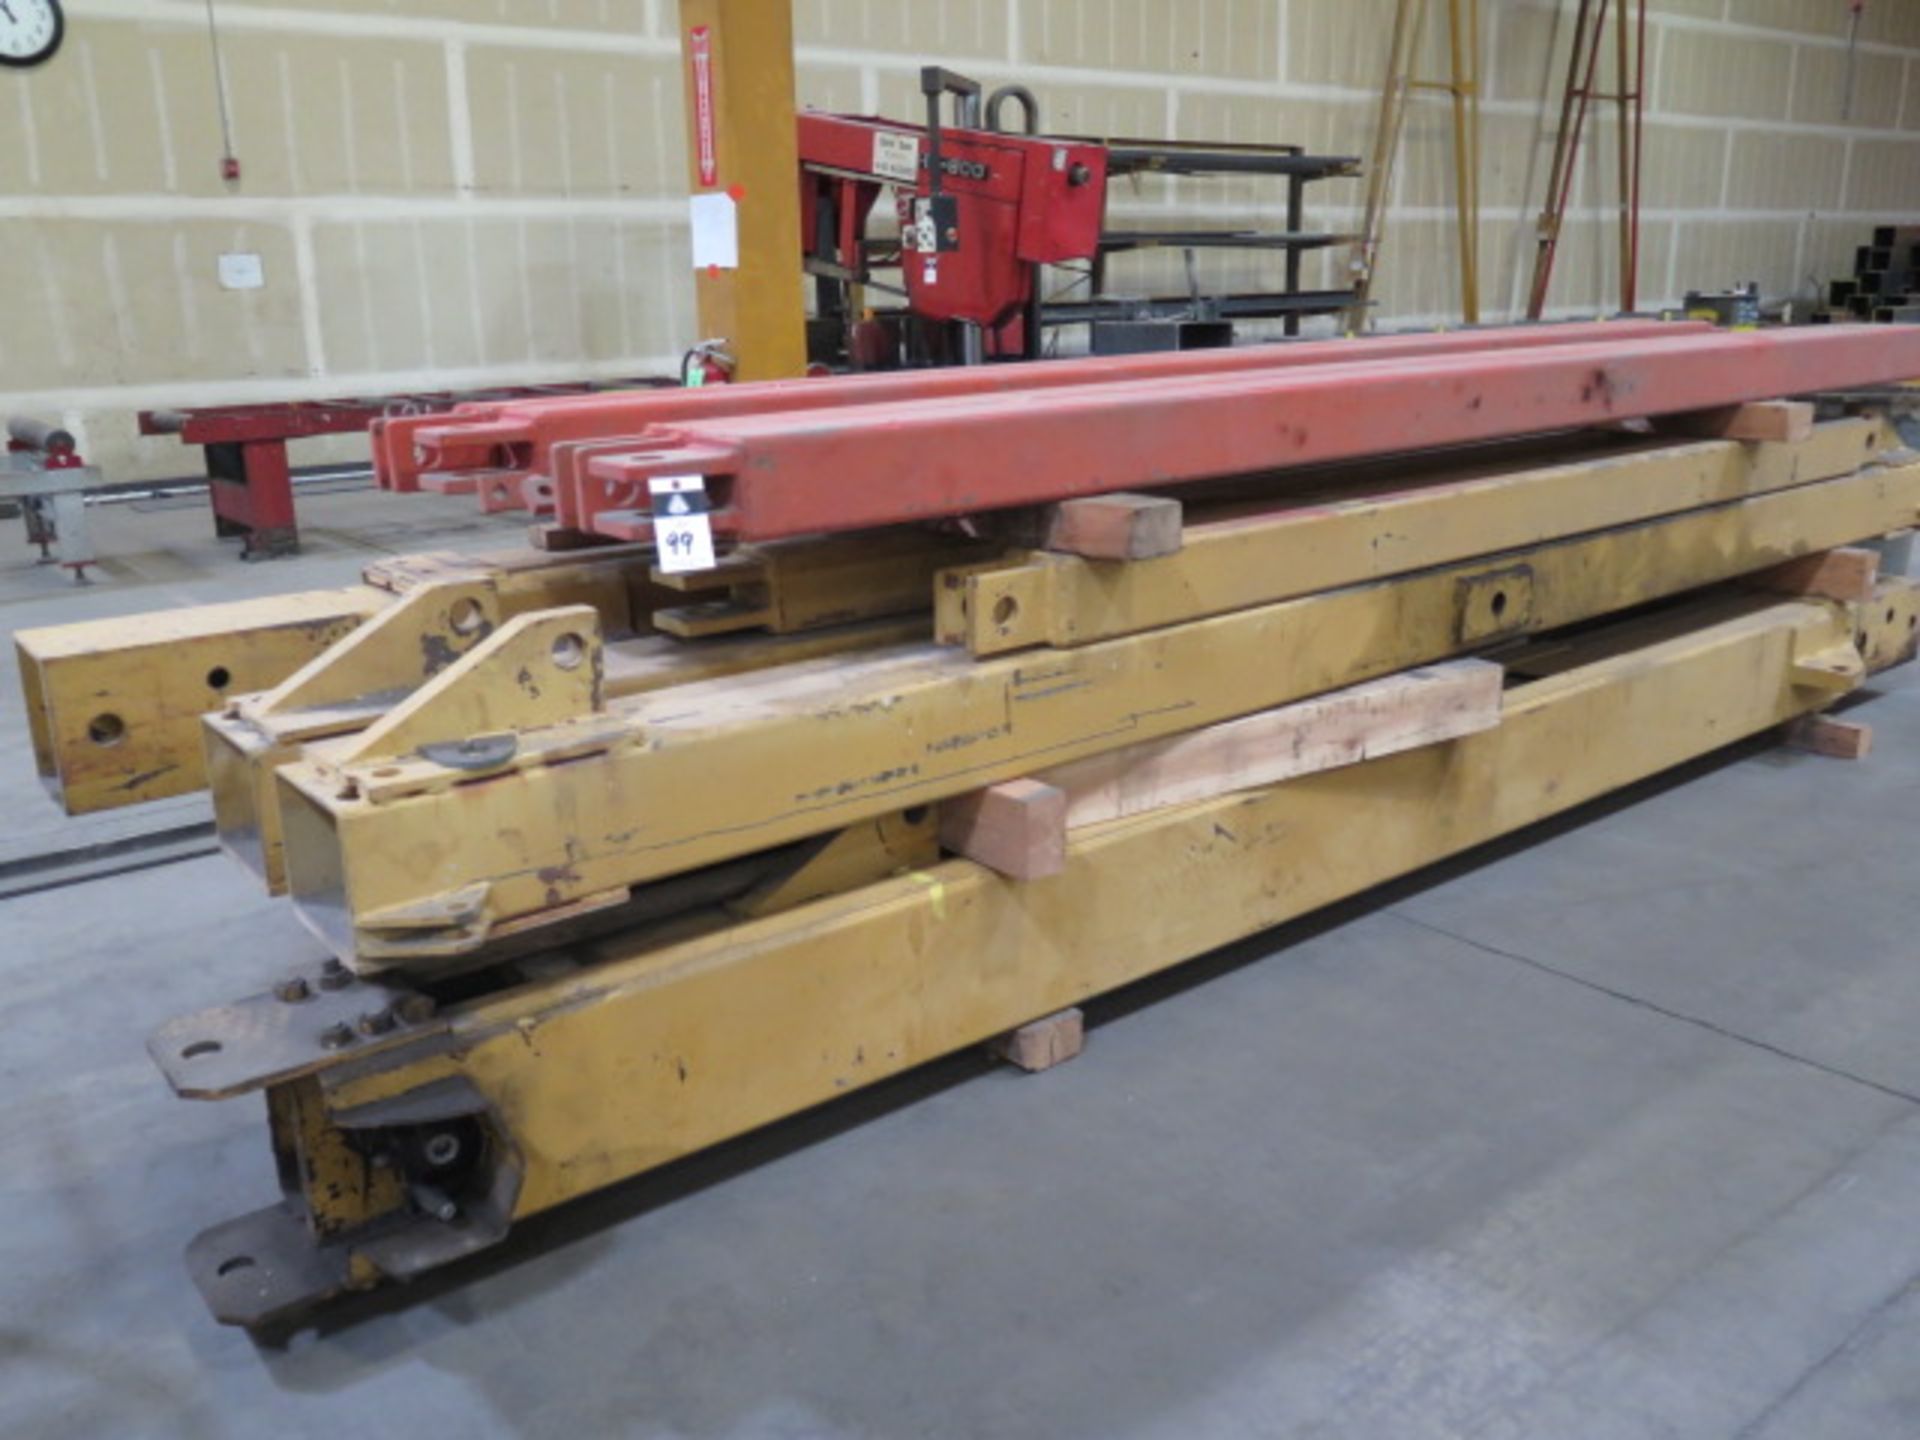 50 Ton Hydraulic Gantry Machinery Lift (SOLD AS-IS - NO WATRRANTY) - Image 3 of 20